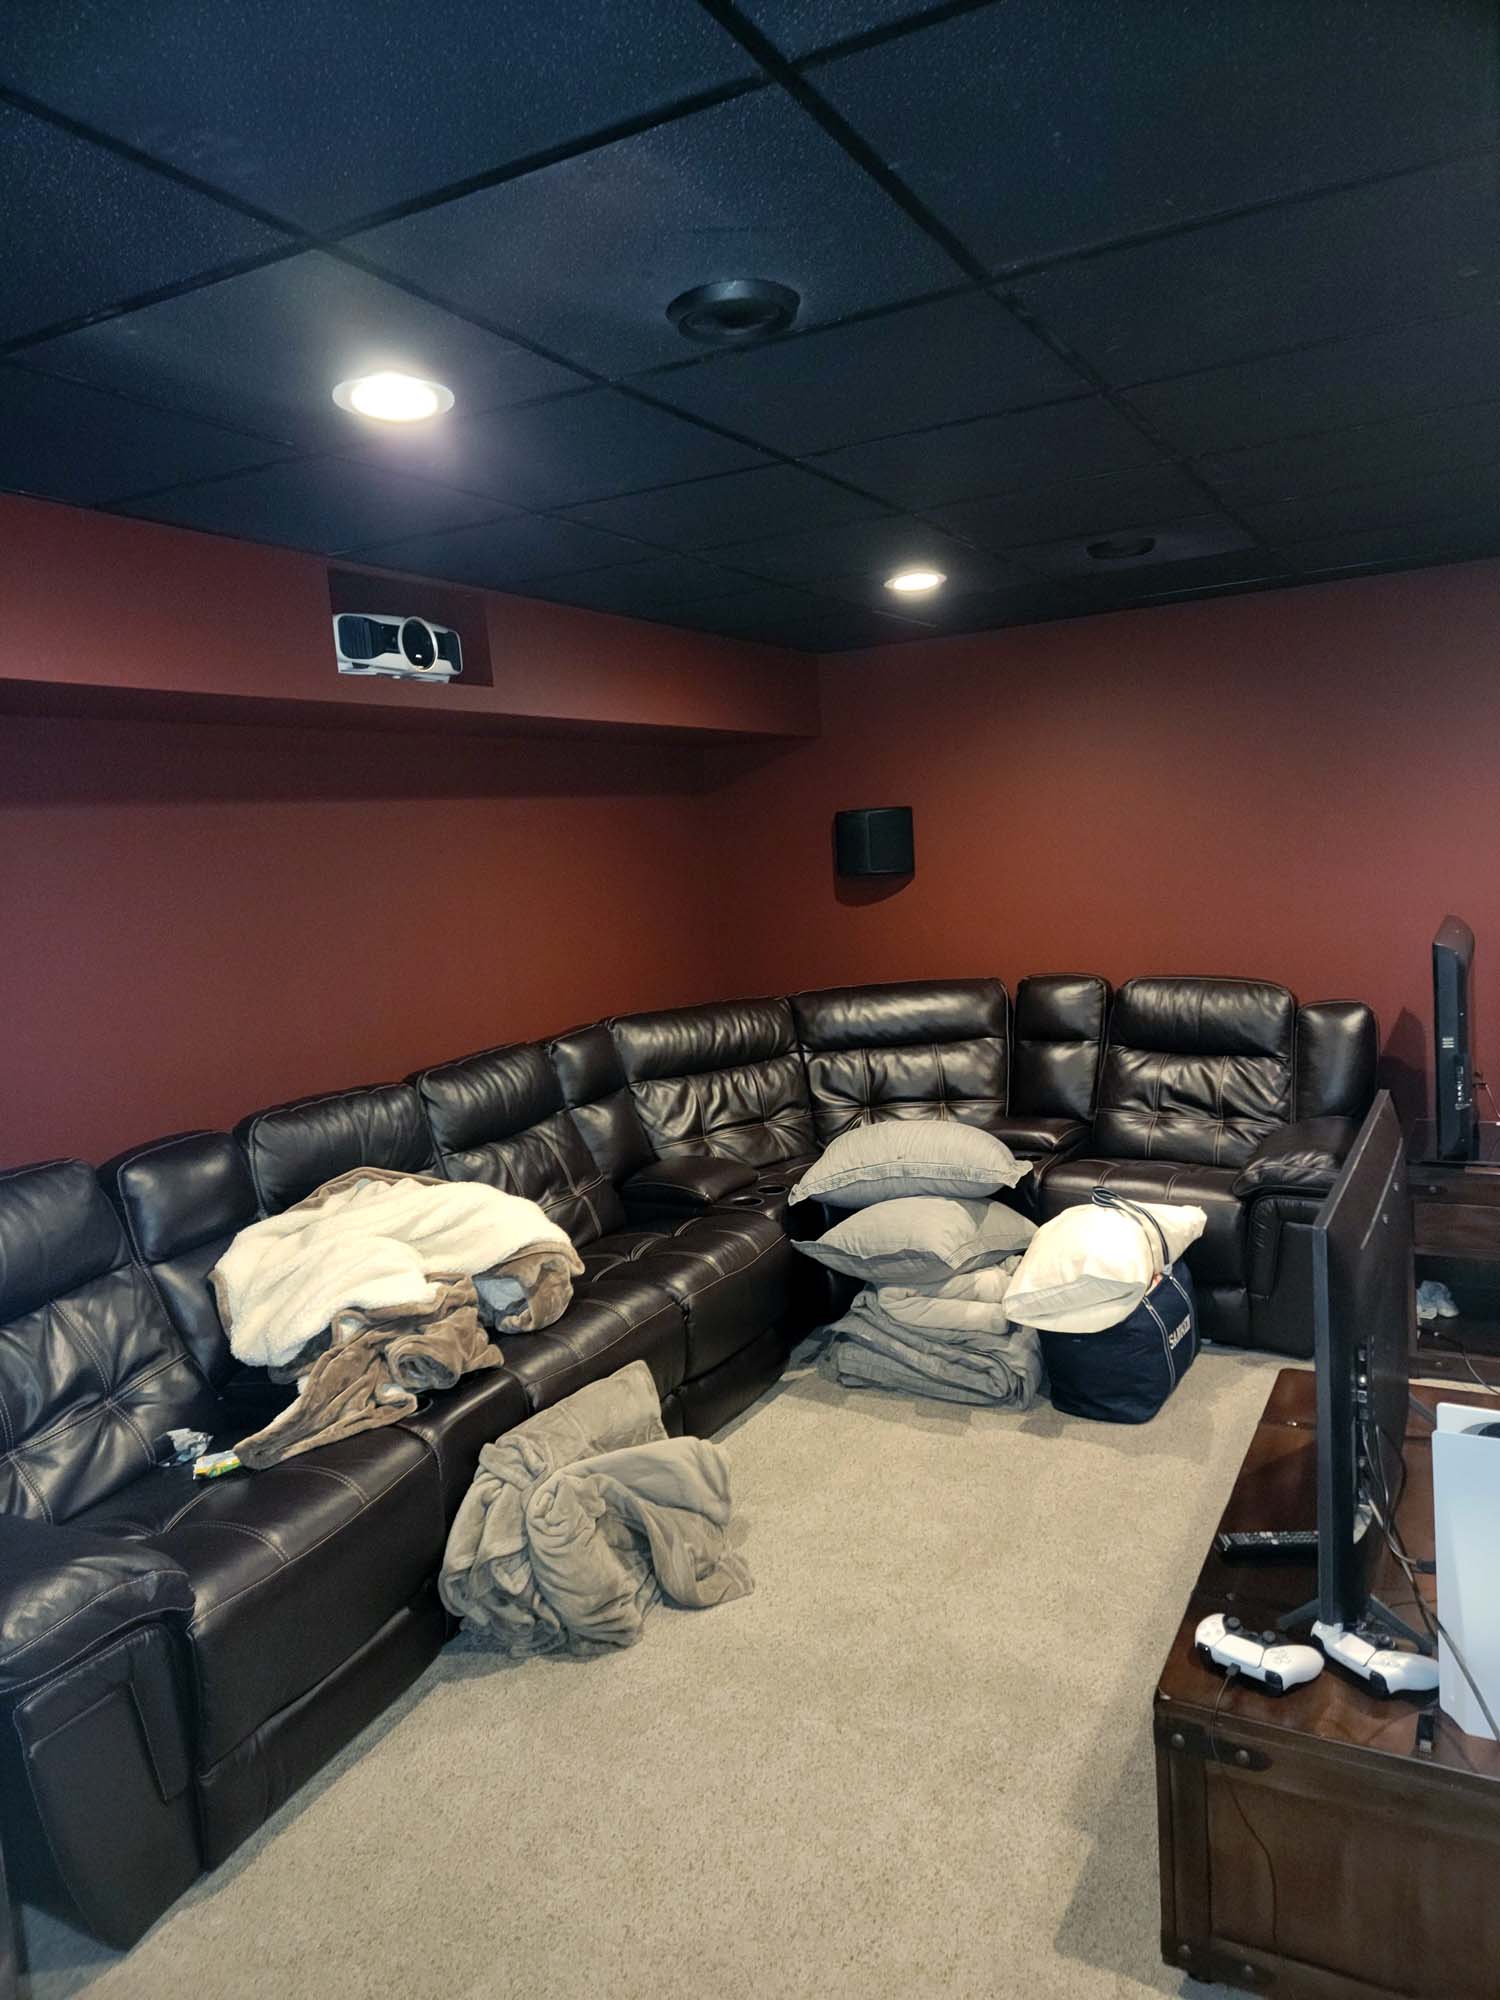 Old closed media room seating before remodel